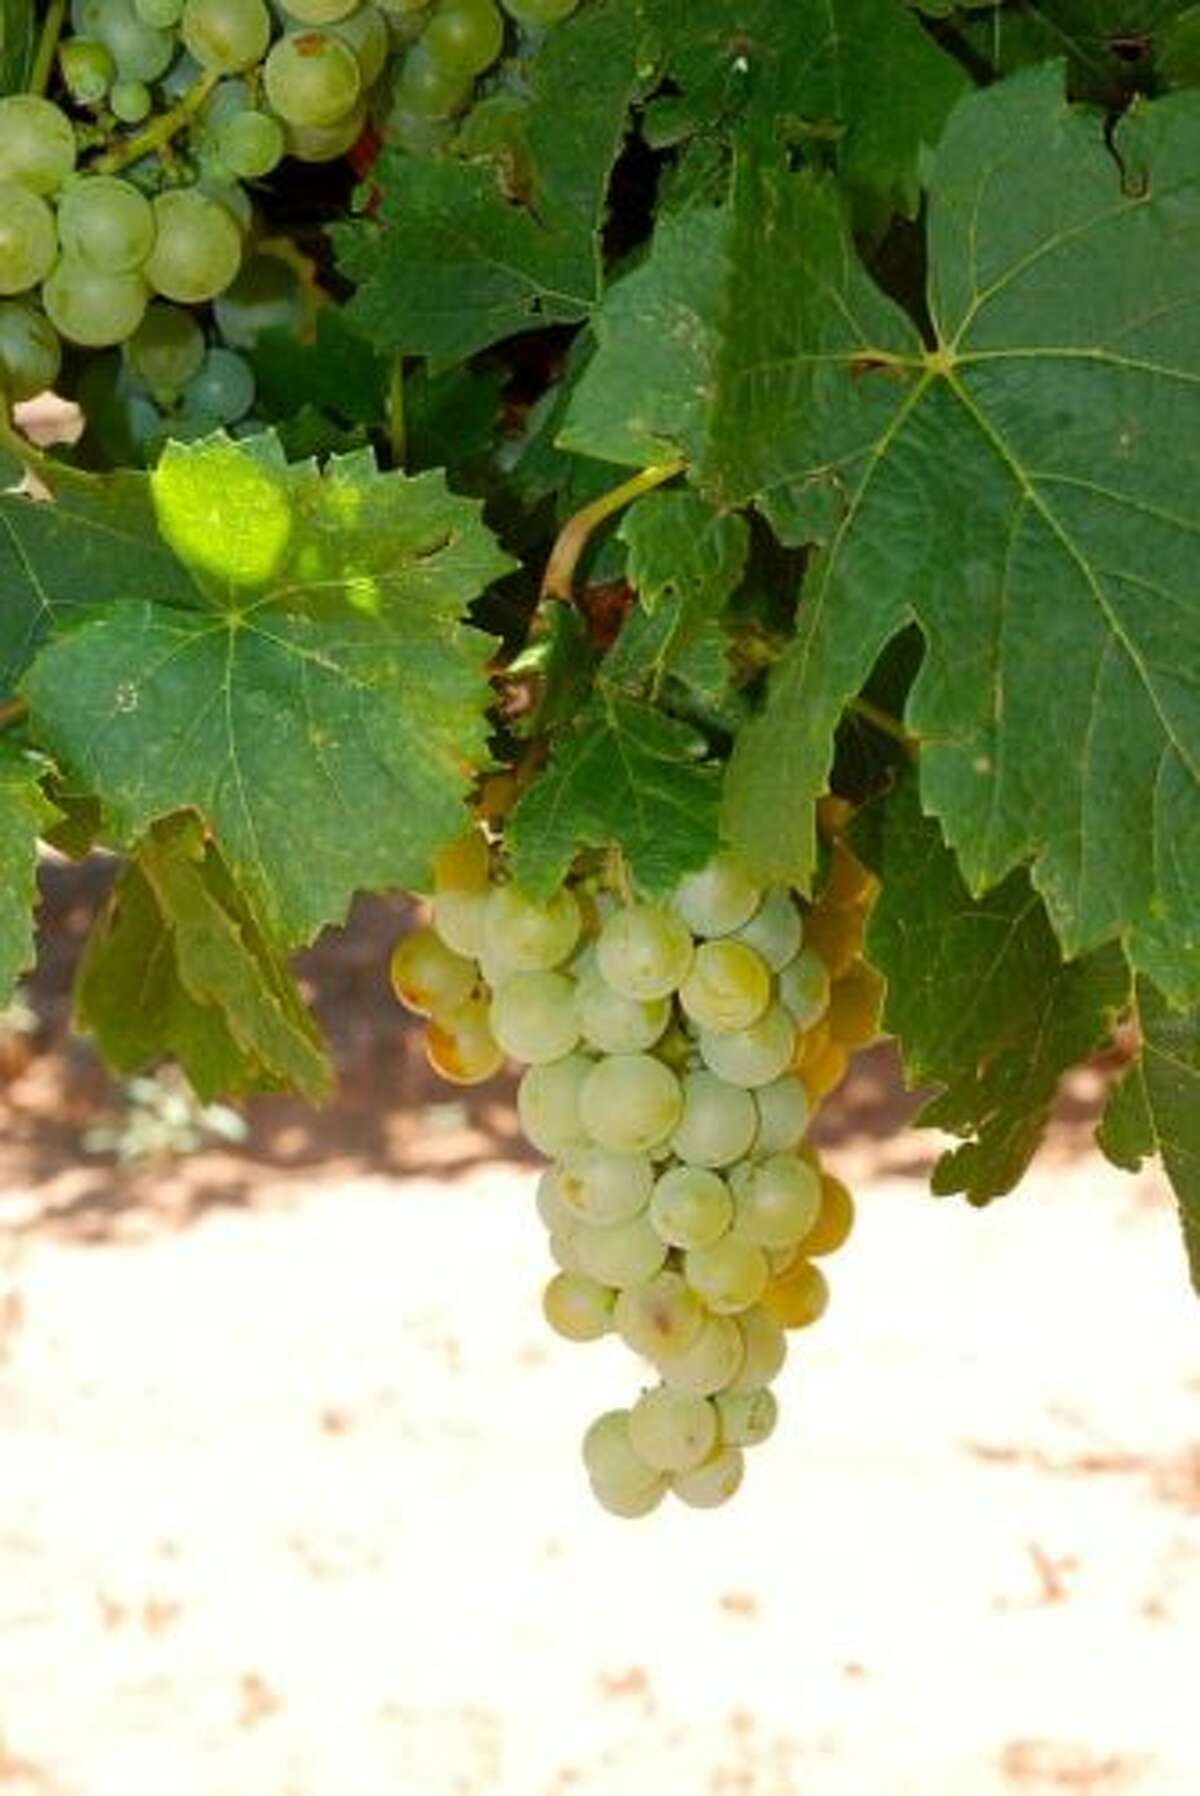 These luscious white grapes are just about ready to pick on the Texas High Plains. The harvest is coming in early this year due to a mild winter.